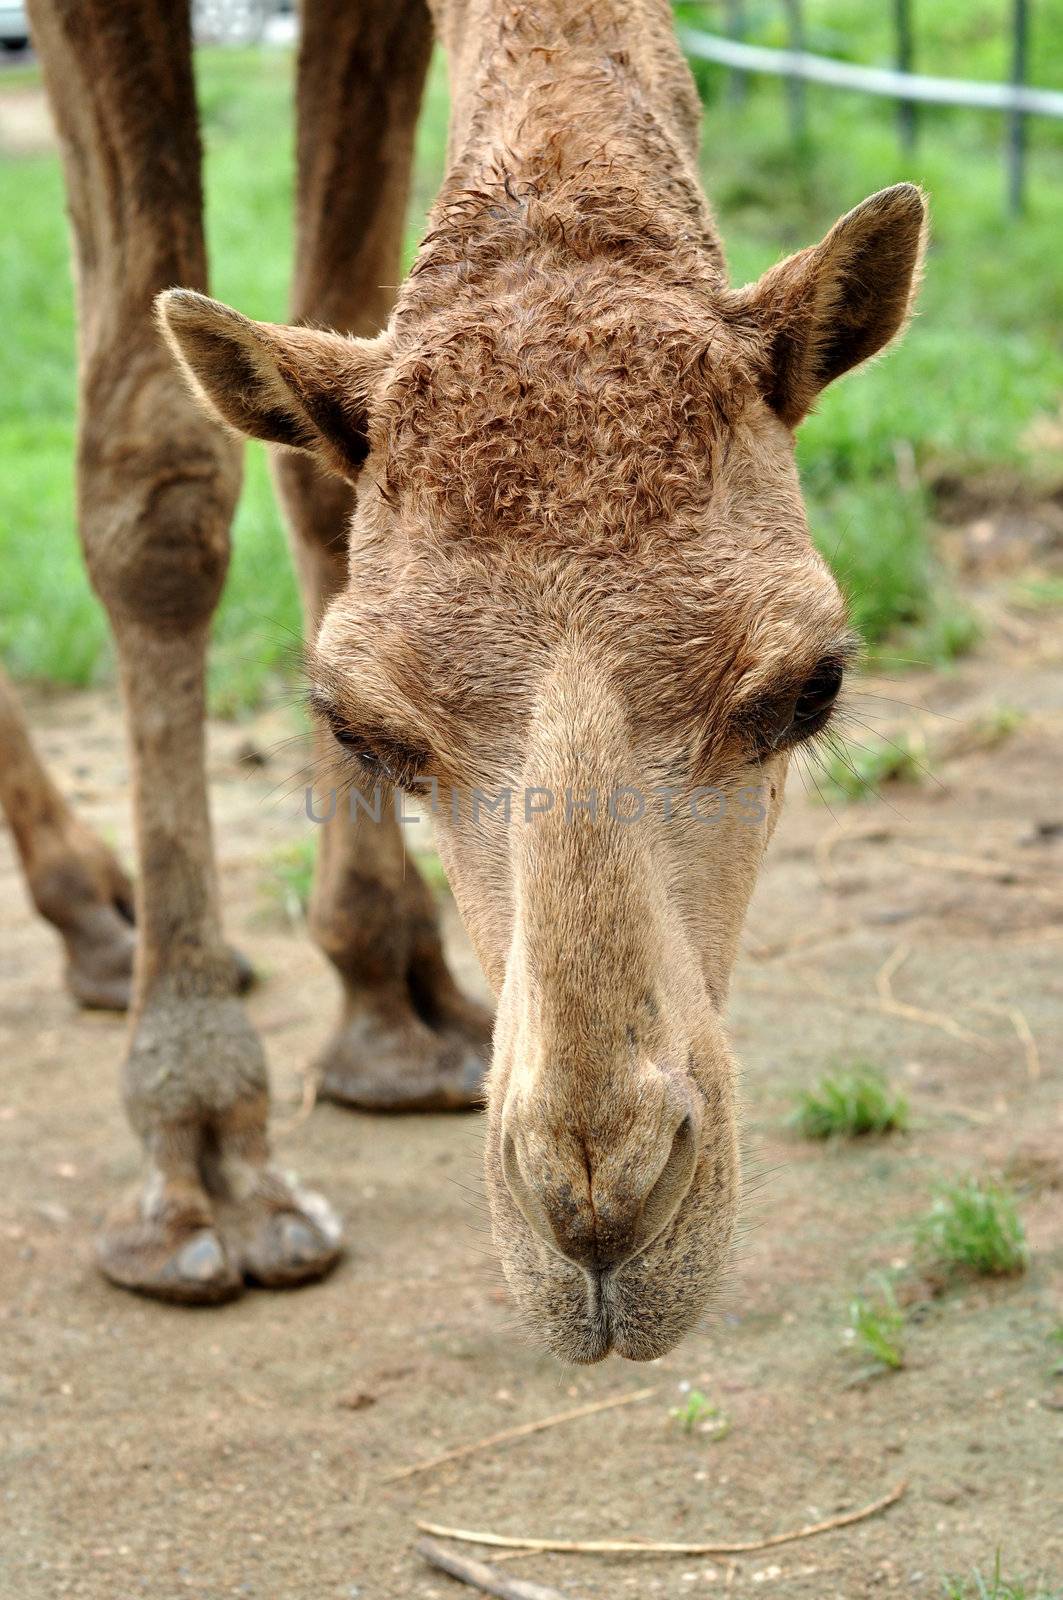 The dromedary or Arabian camel has a single hump. Dromedaries are native to the dry desert areas of West Asia.